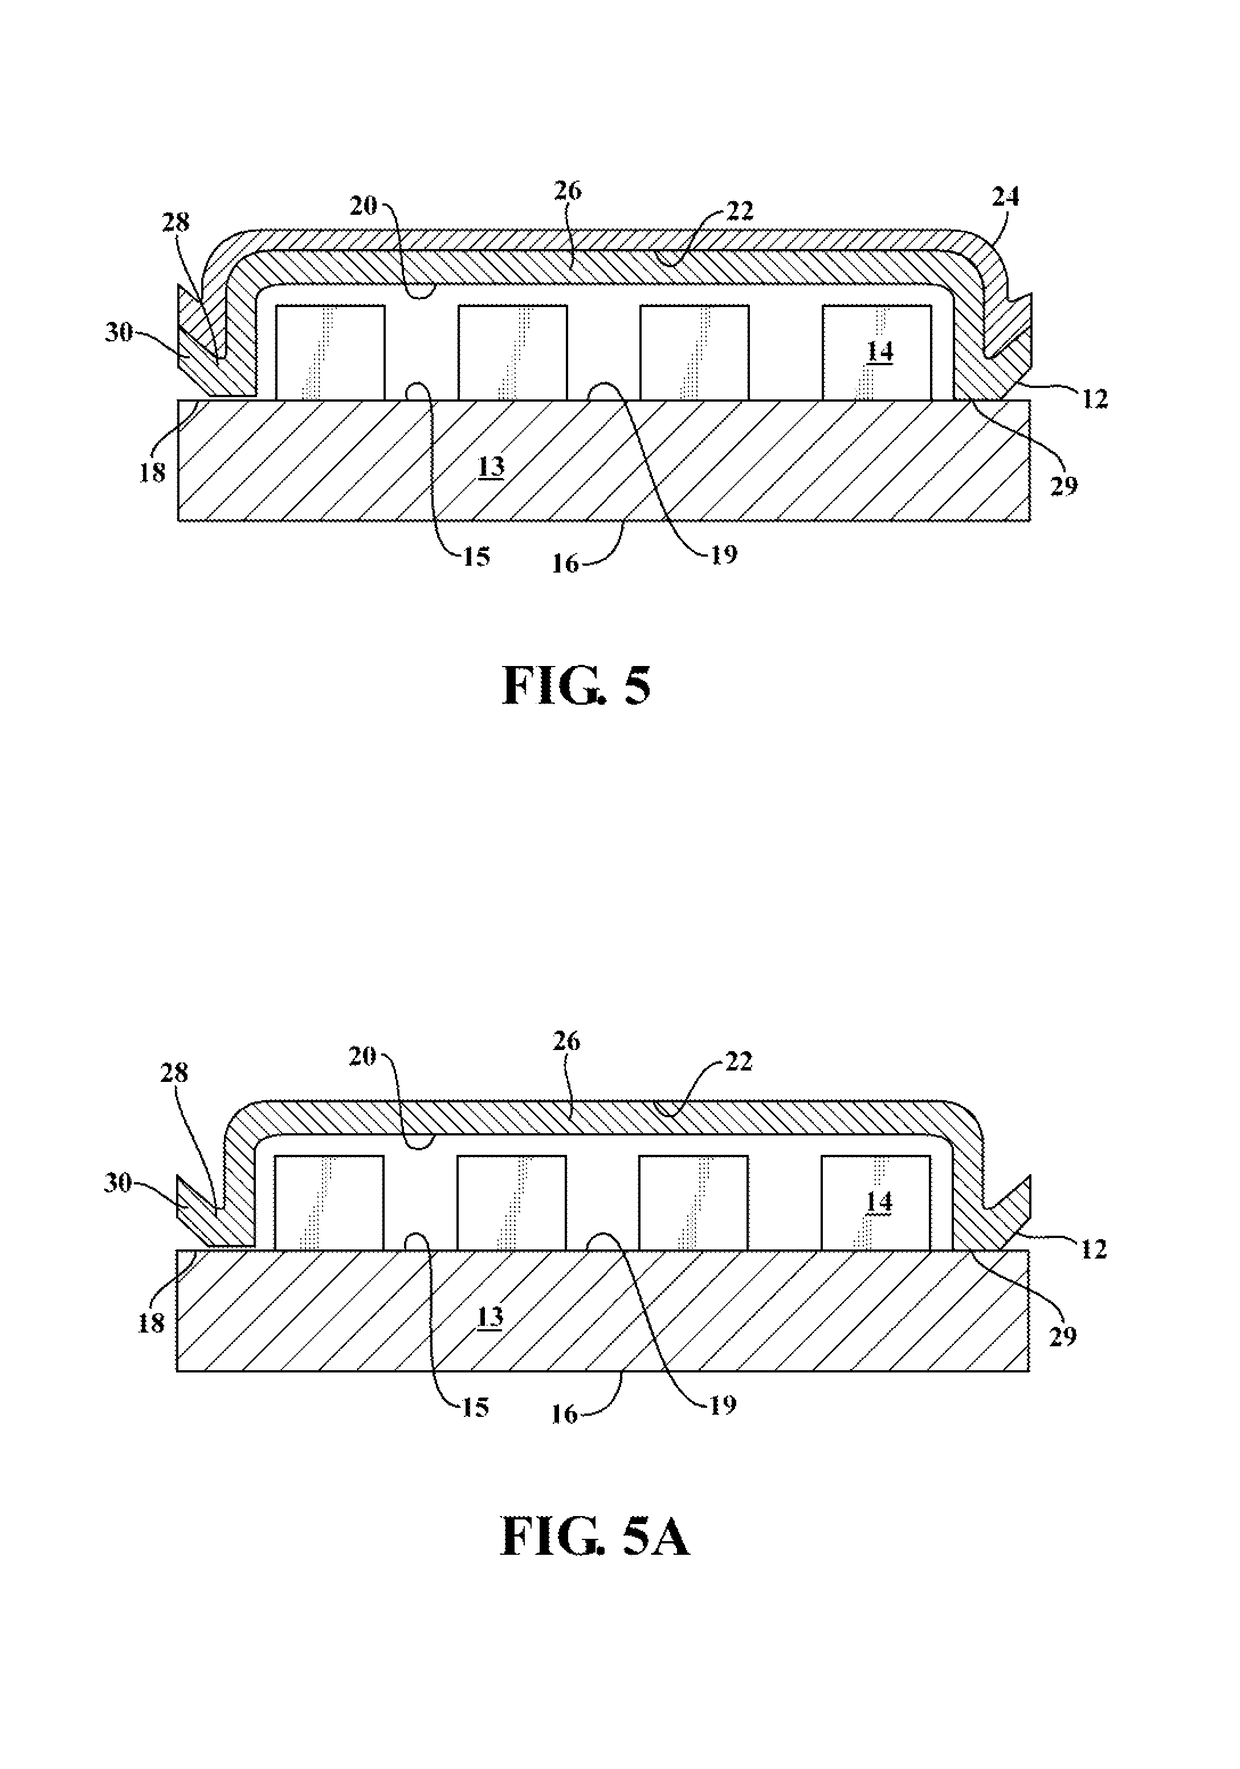 Vacuum lamination method for forming a conformally coated article and associated conformally coated articles formed therefrom